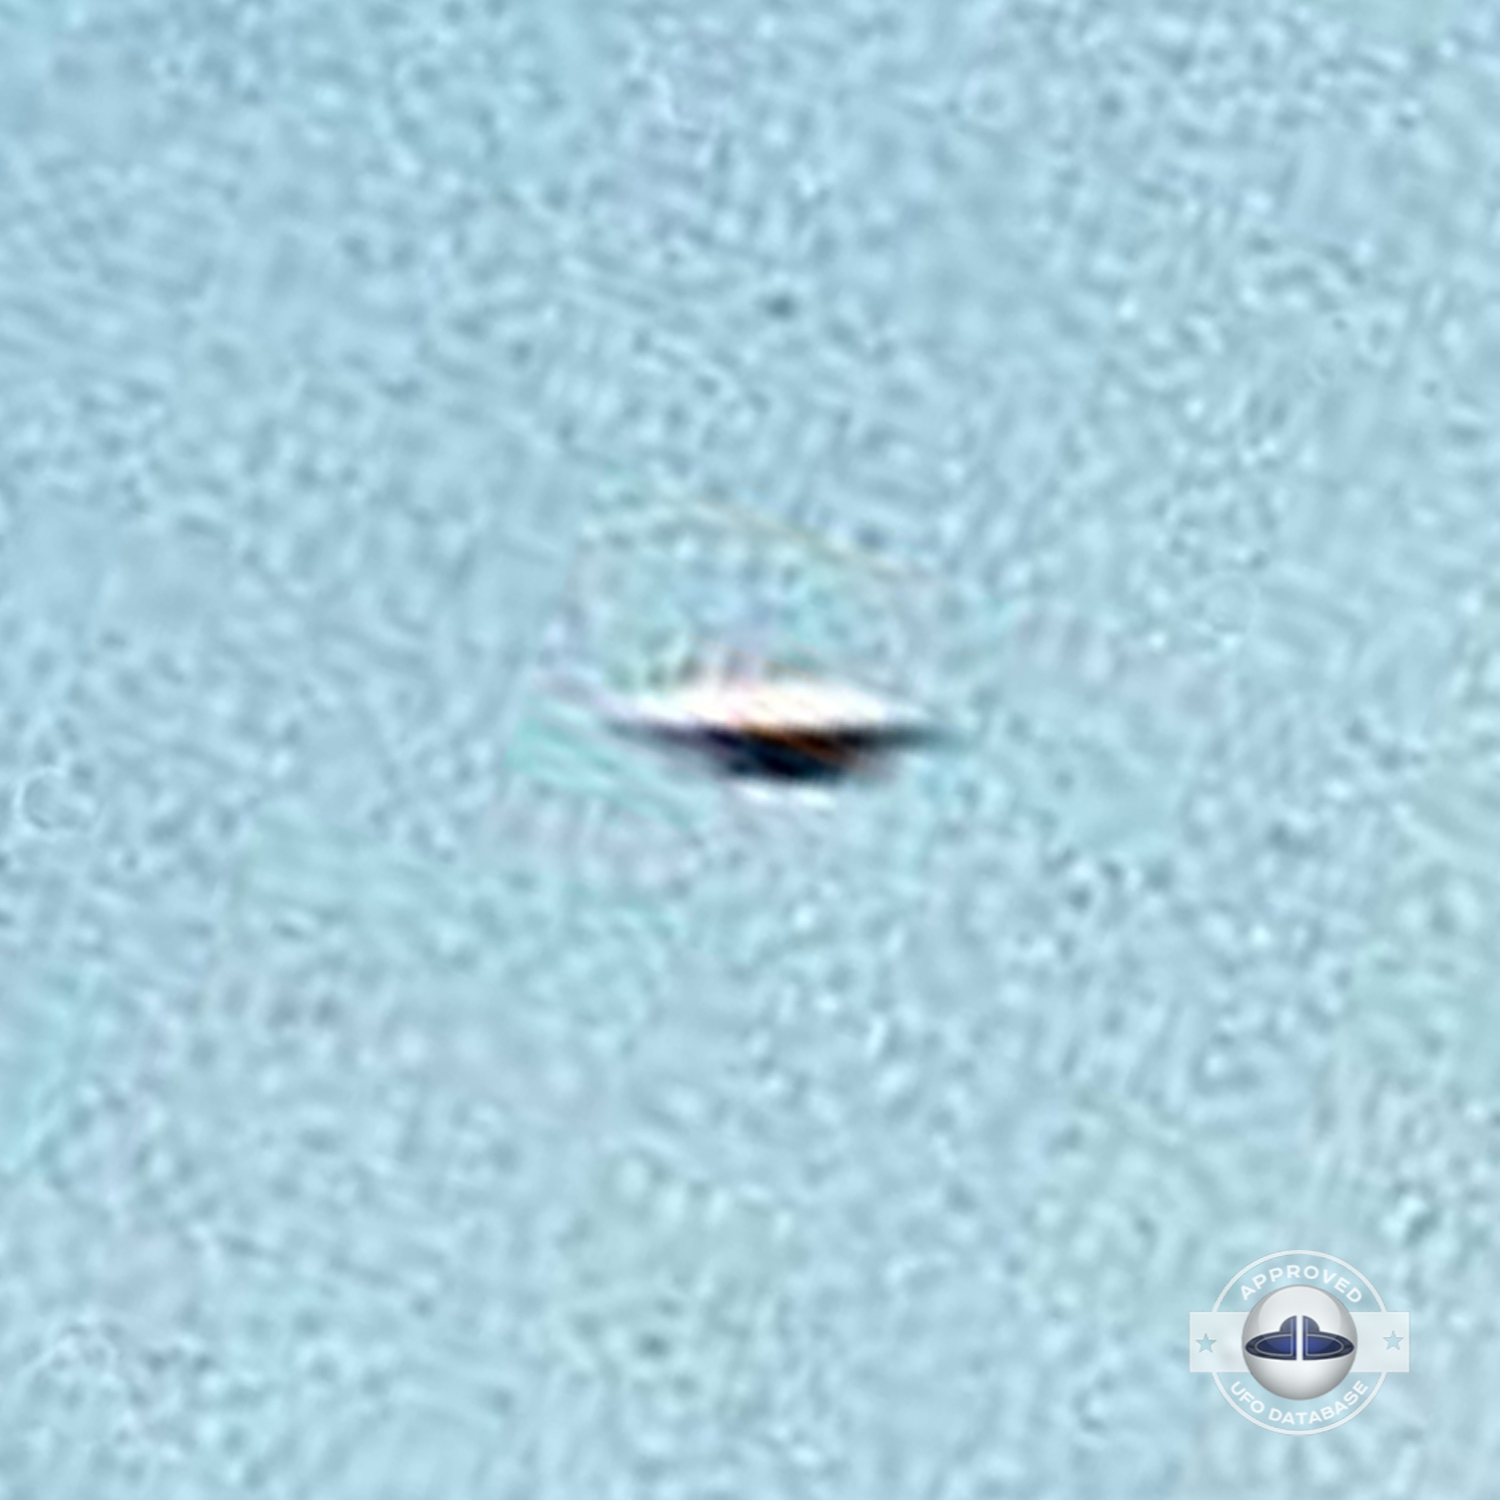 UFO picture shot in Plymouth Zoo which was located in Central Park UFO Picture #132-6